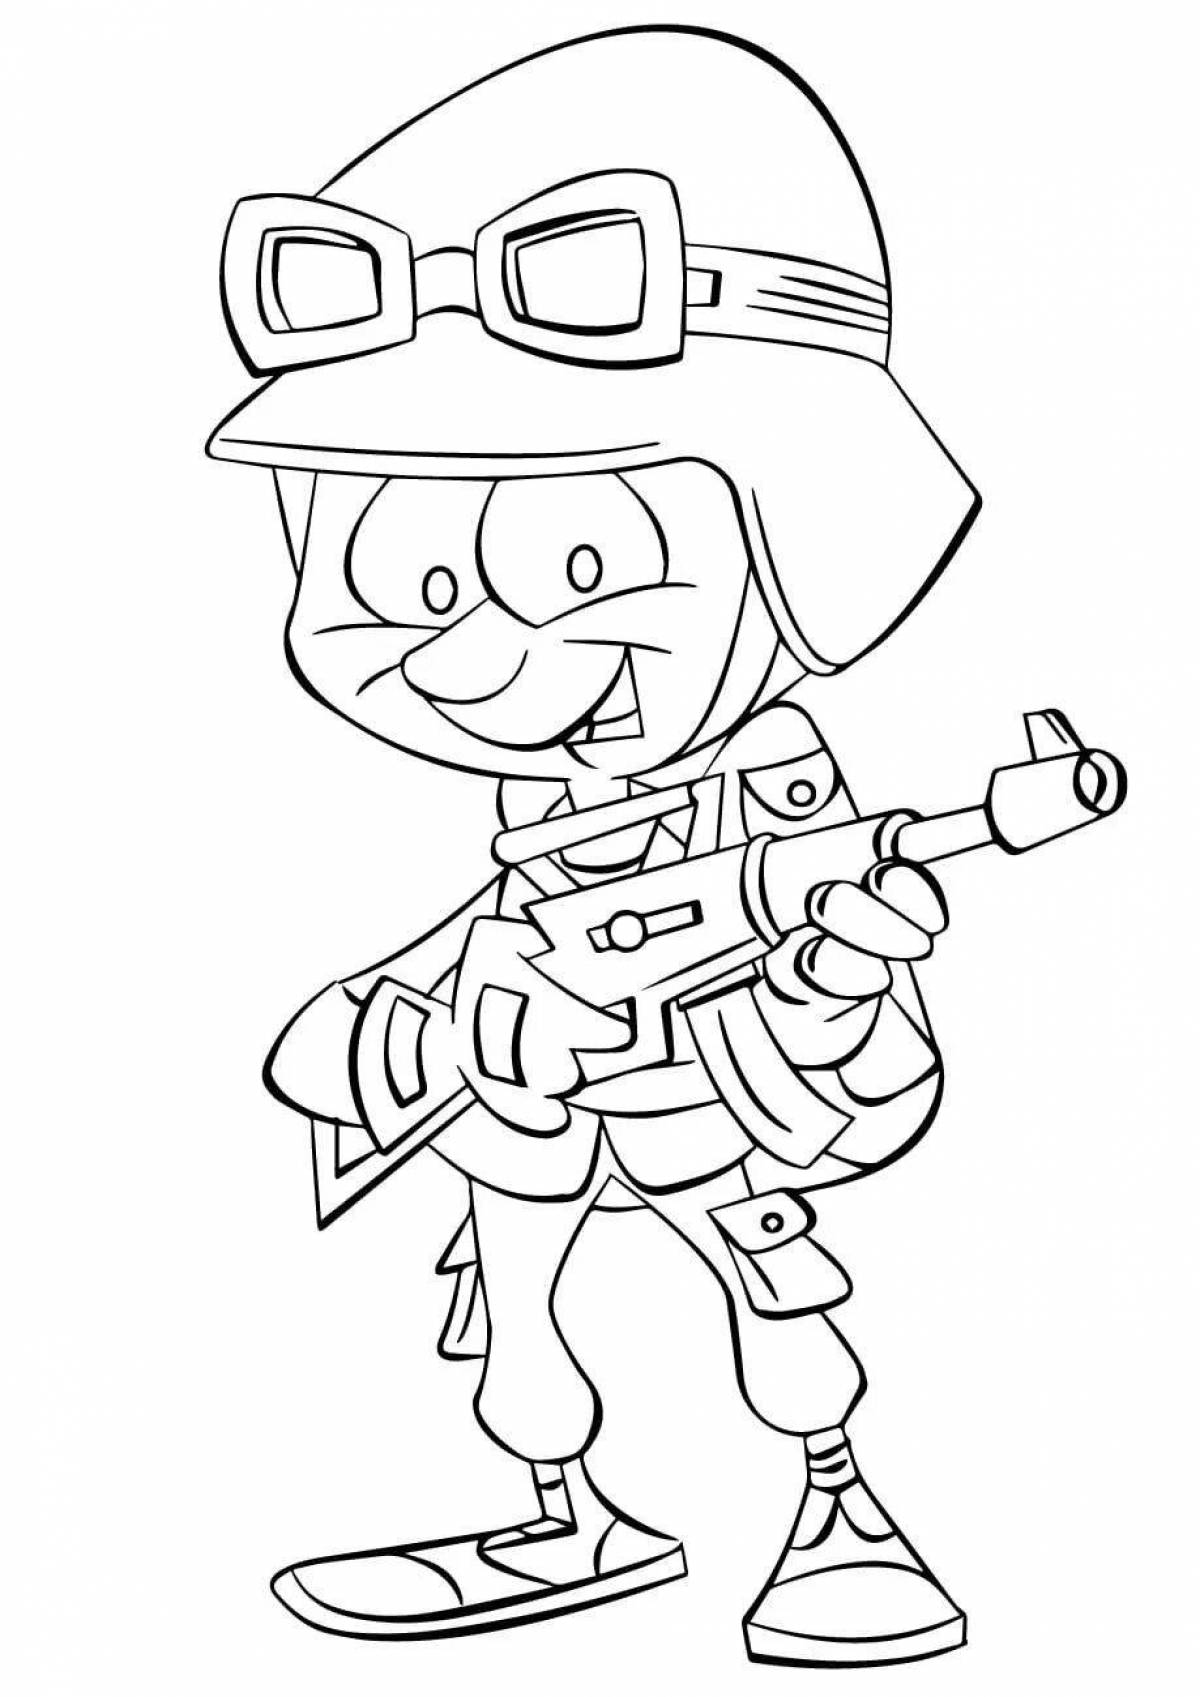 Gorgeous toy soldiers coloring pages for boys